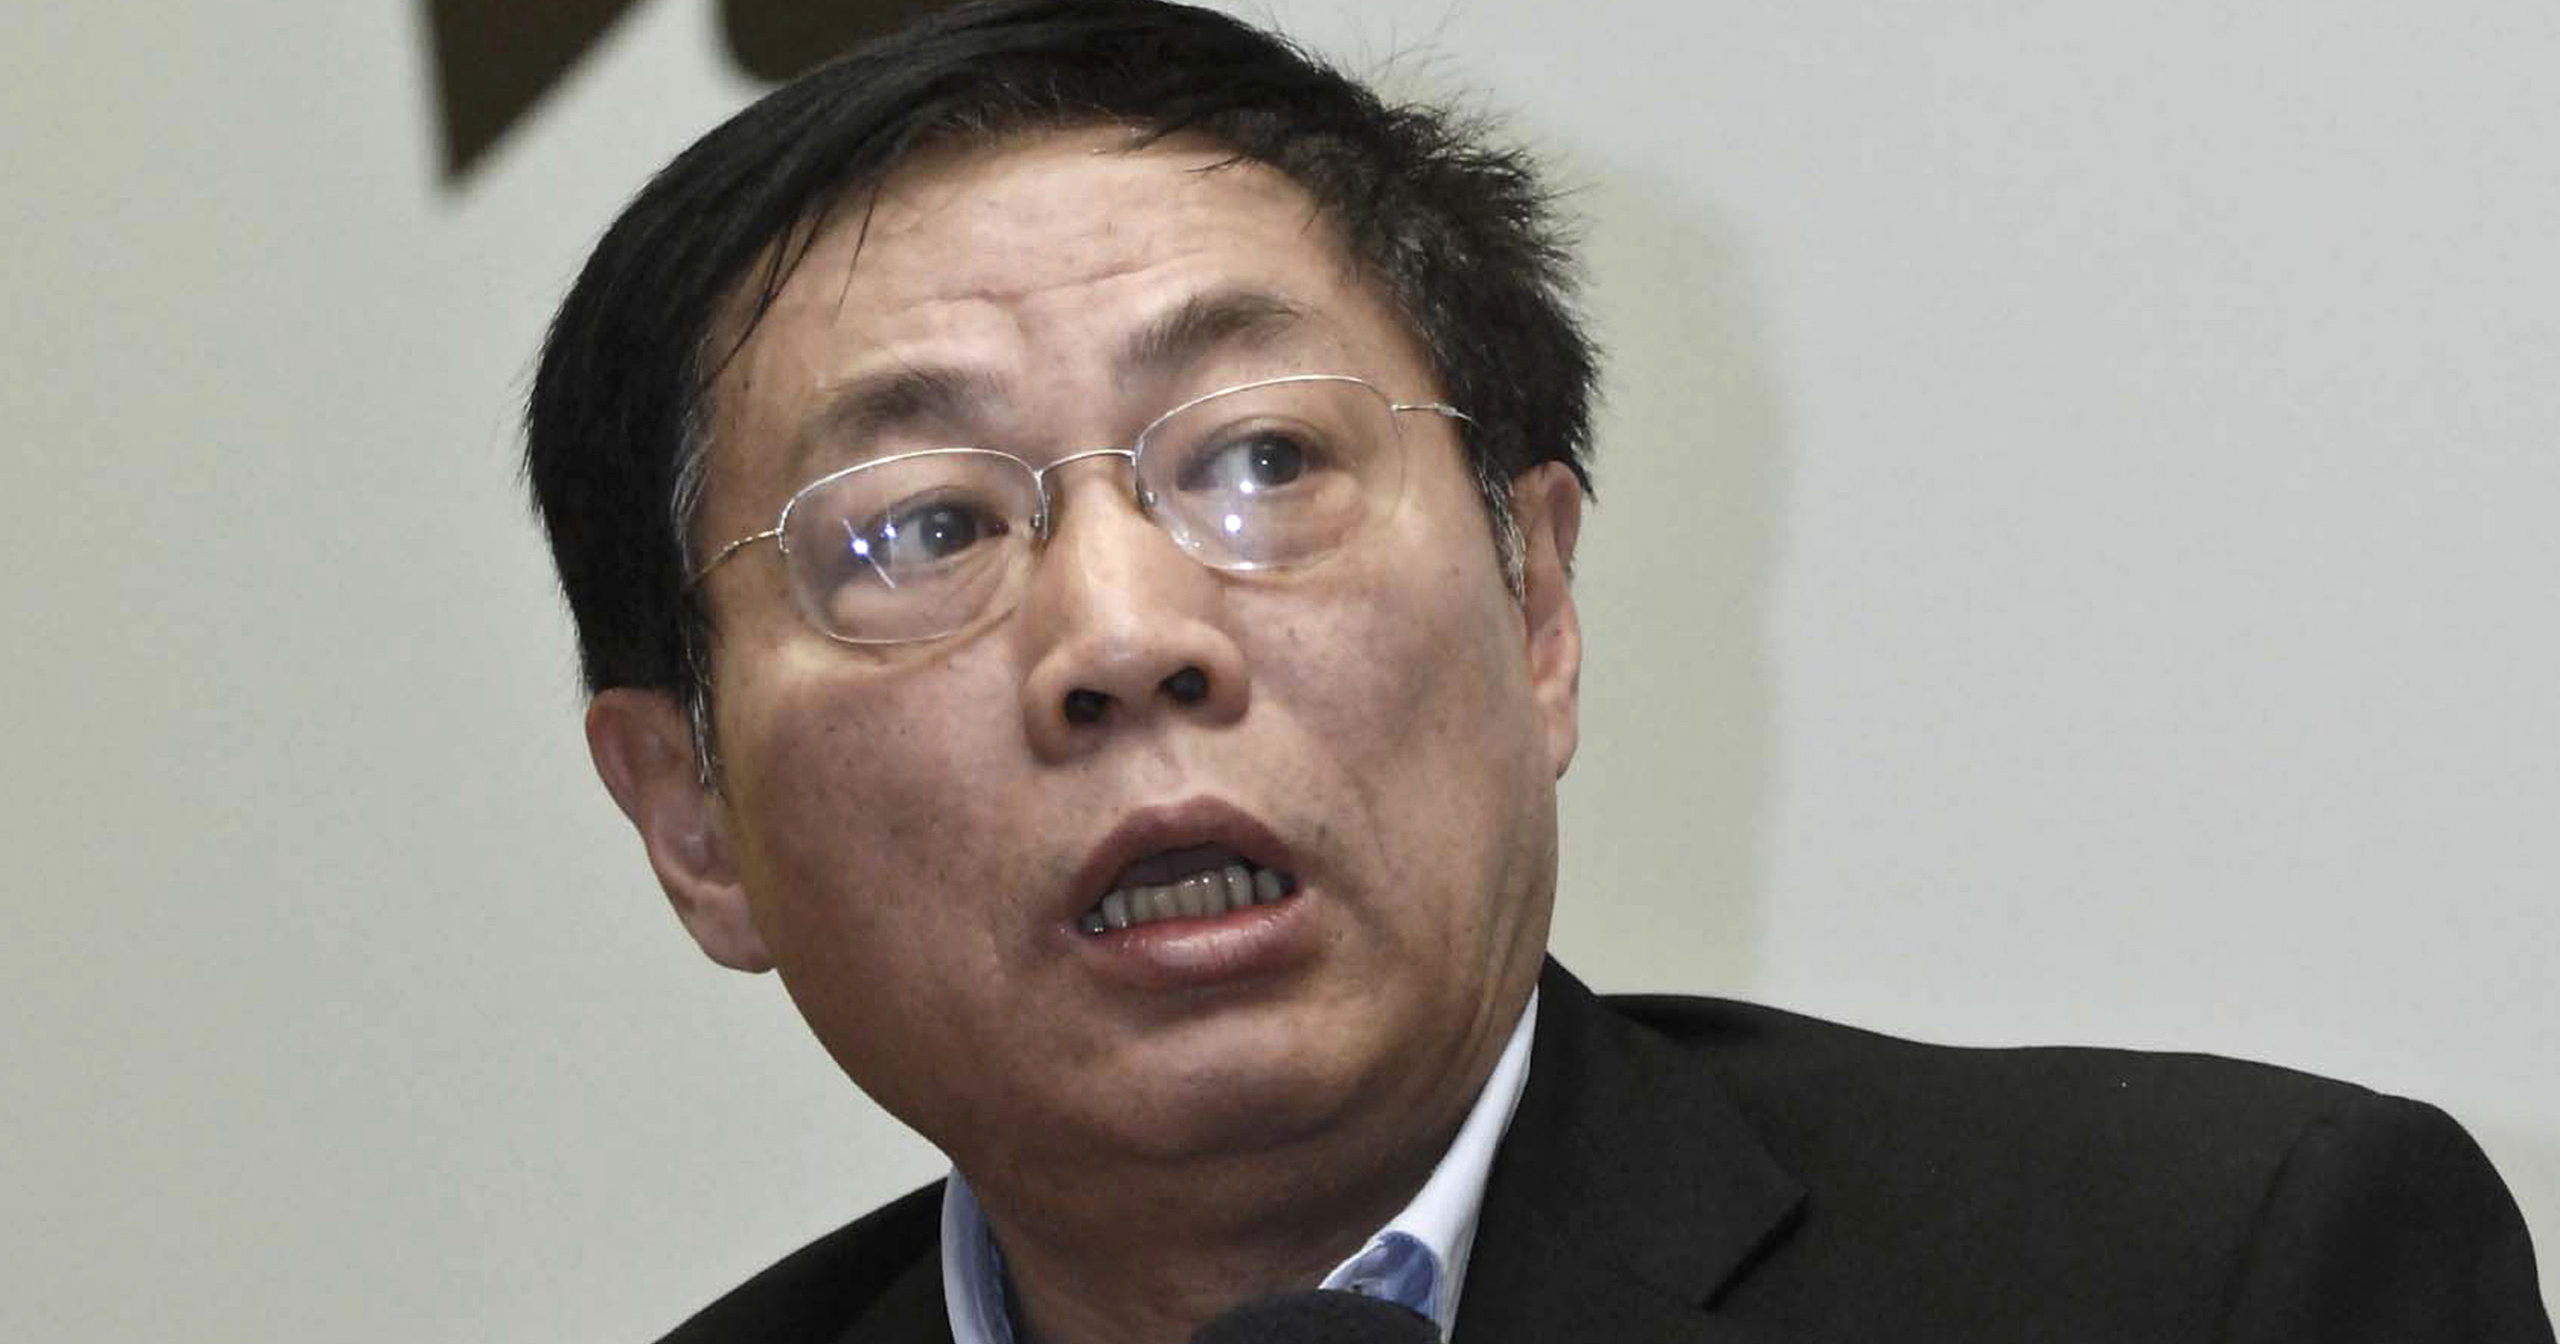 In this Nov. 12, 2010, file photo, Chinese real estate mogul Ren Zhiqiang speaks at a reception in Shanghai. Ren, who publicly criticized President Xi Jinping’s handling of the coronavirus pandemic, was sentenced to 18 years in prison on Sept. 22, 2020, the government announced.